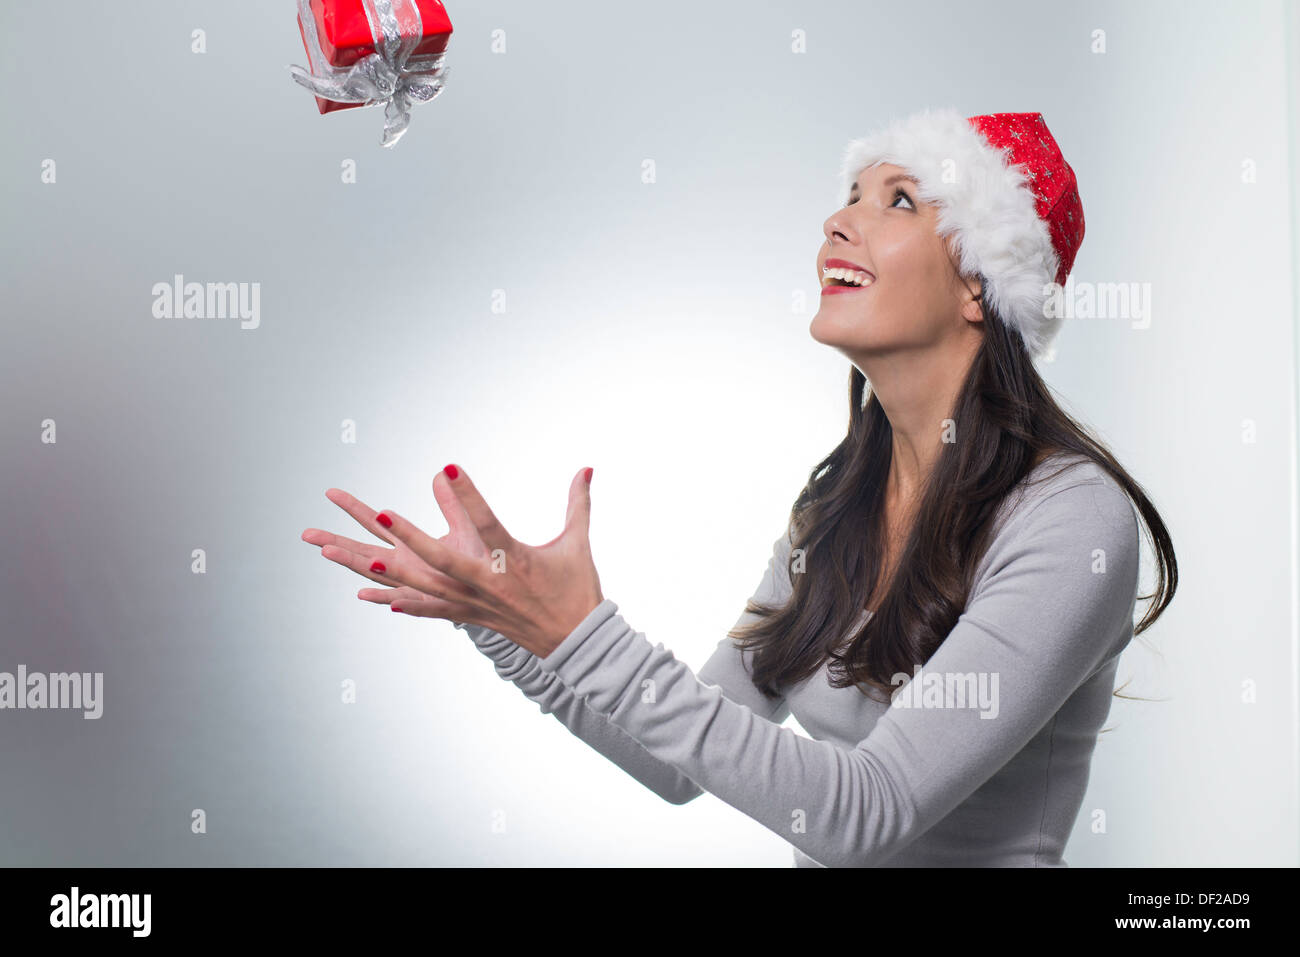 Laughing beautiful woman wearing a red Santa hat catching a surprise Christmas gift suspended midair above her outstretched hand Stock Photo